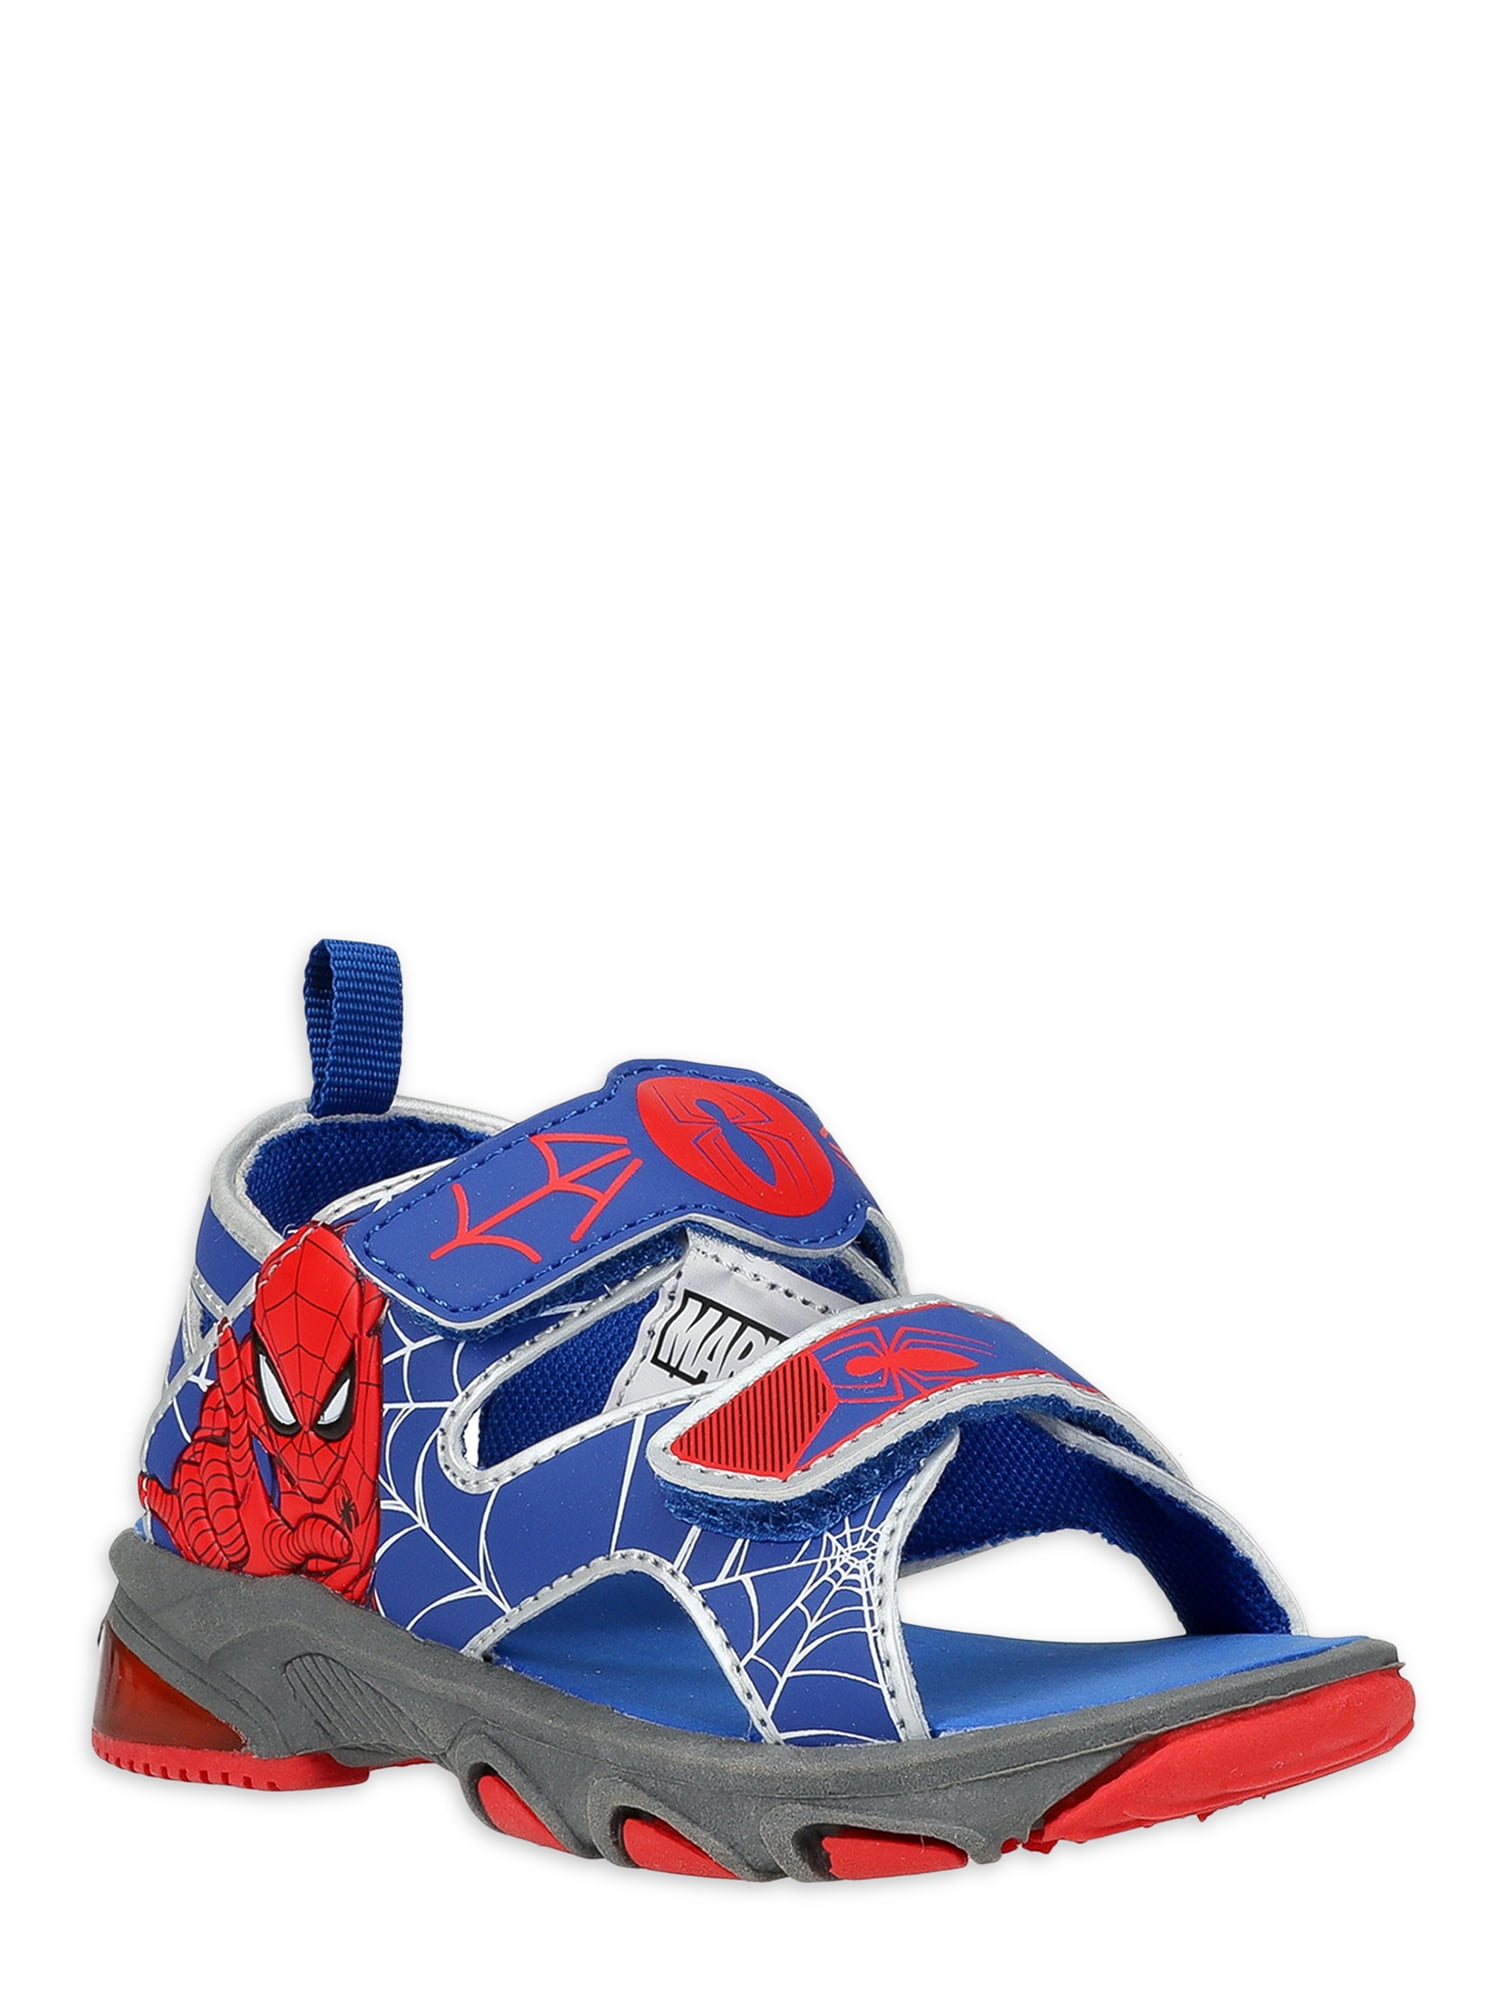 ANKIDS Fashion Kids Spider-Man Sandals Boys Baby Bear Shoes